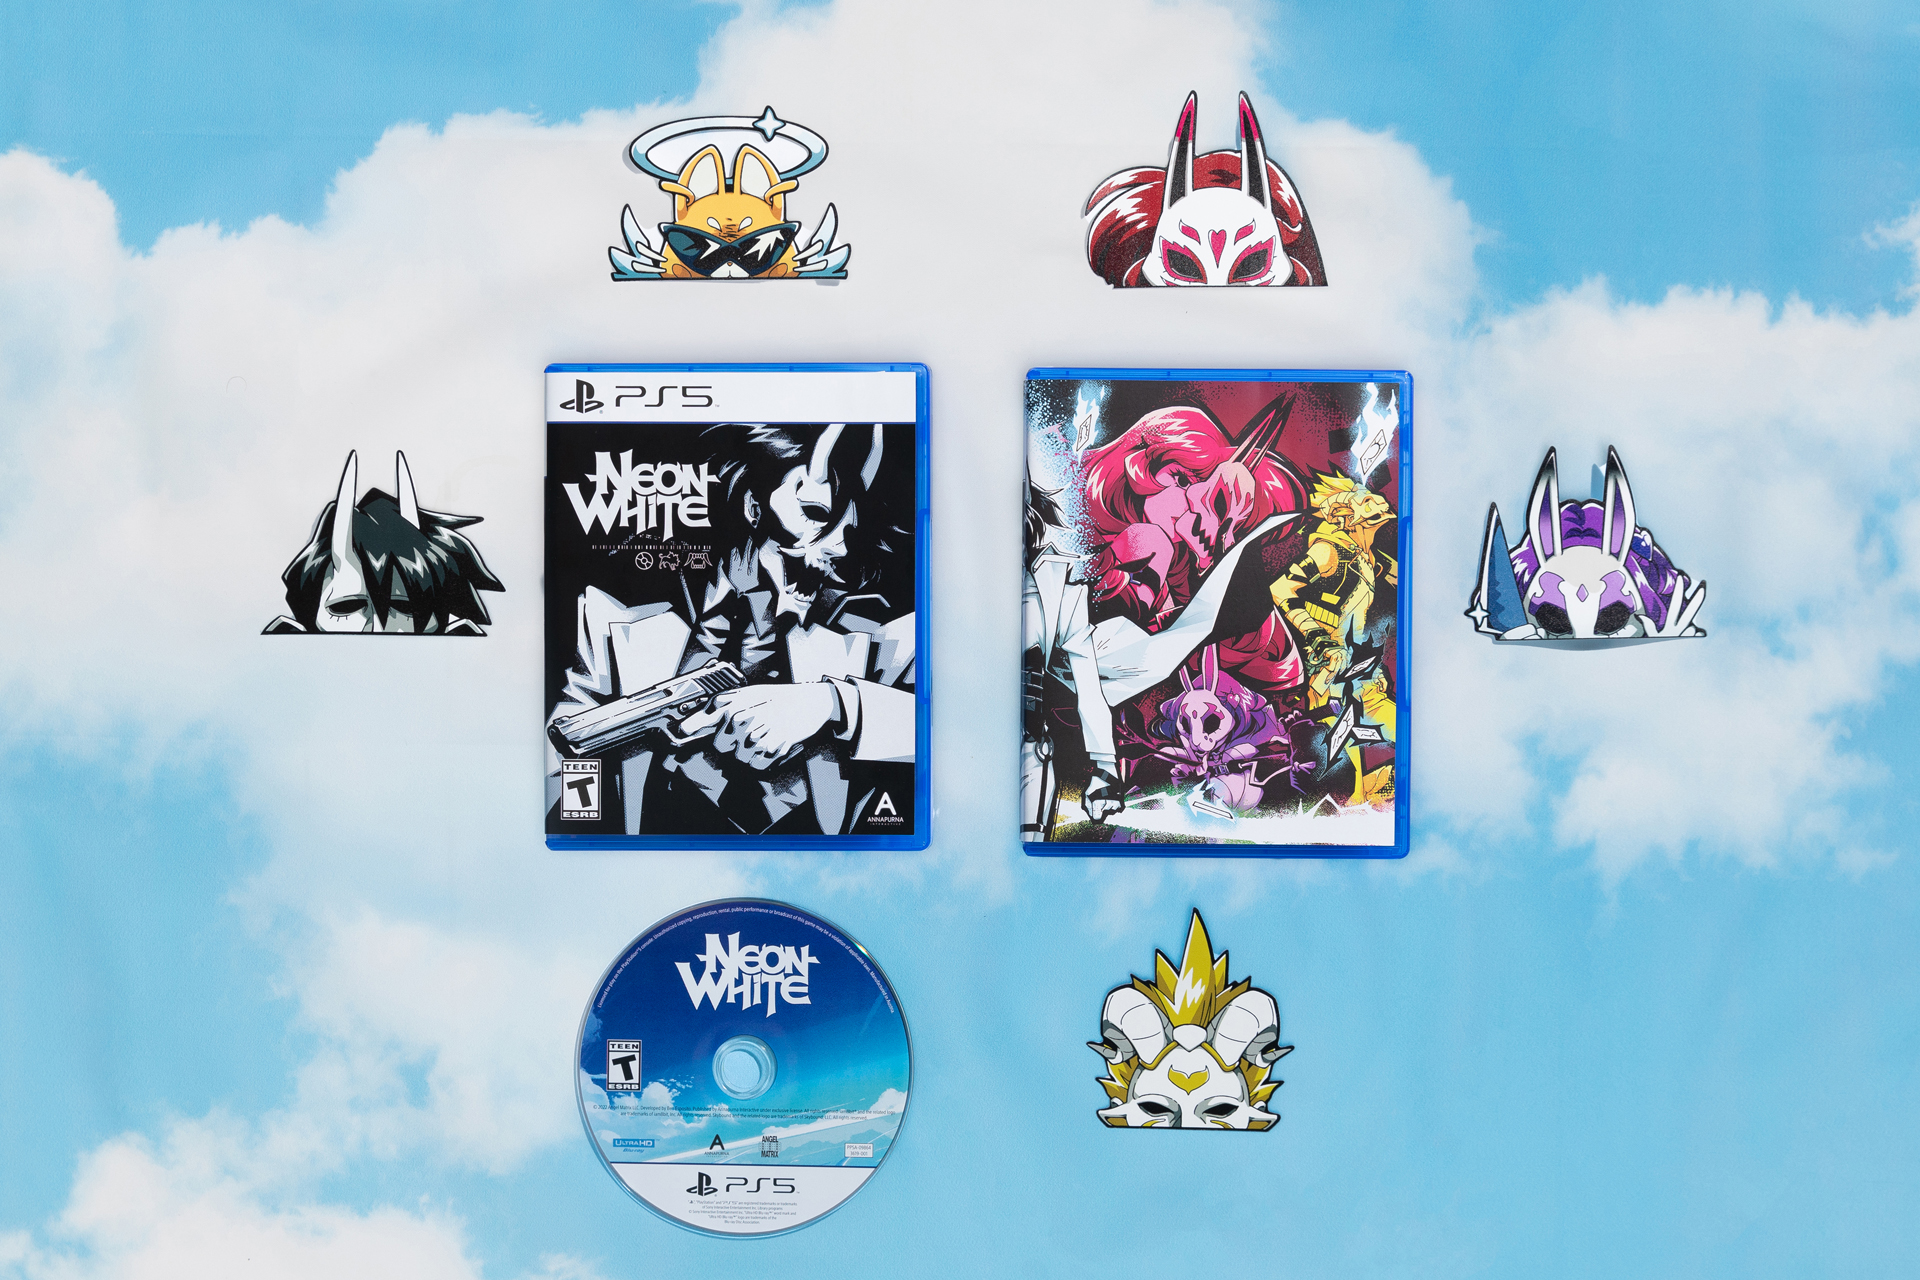 Neon White Physical Editions Now Available for Switch